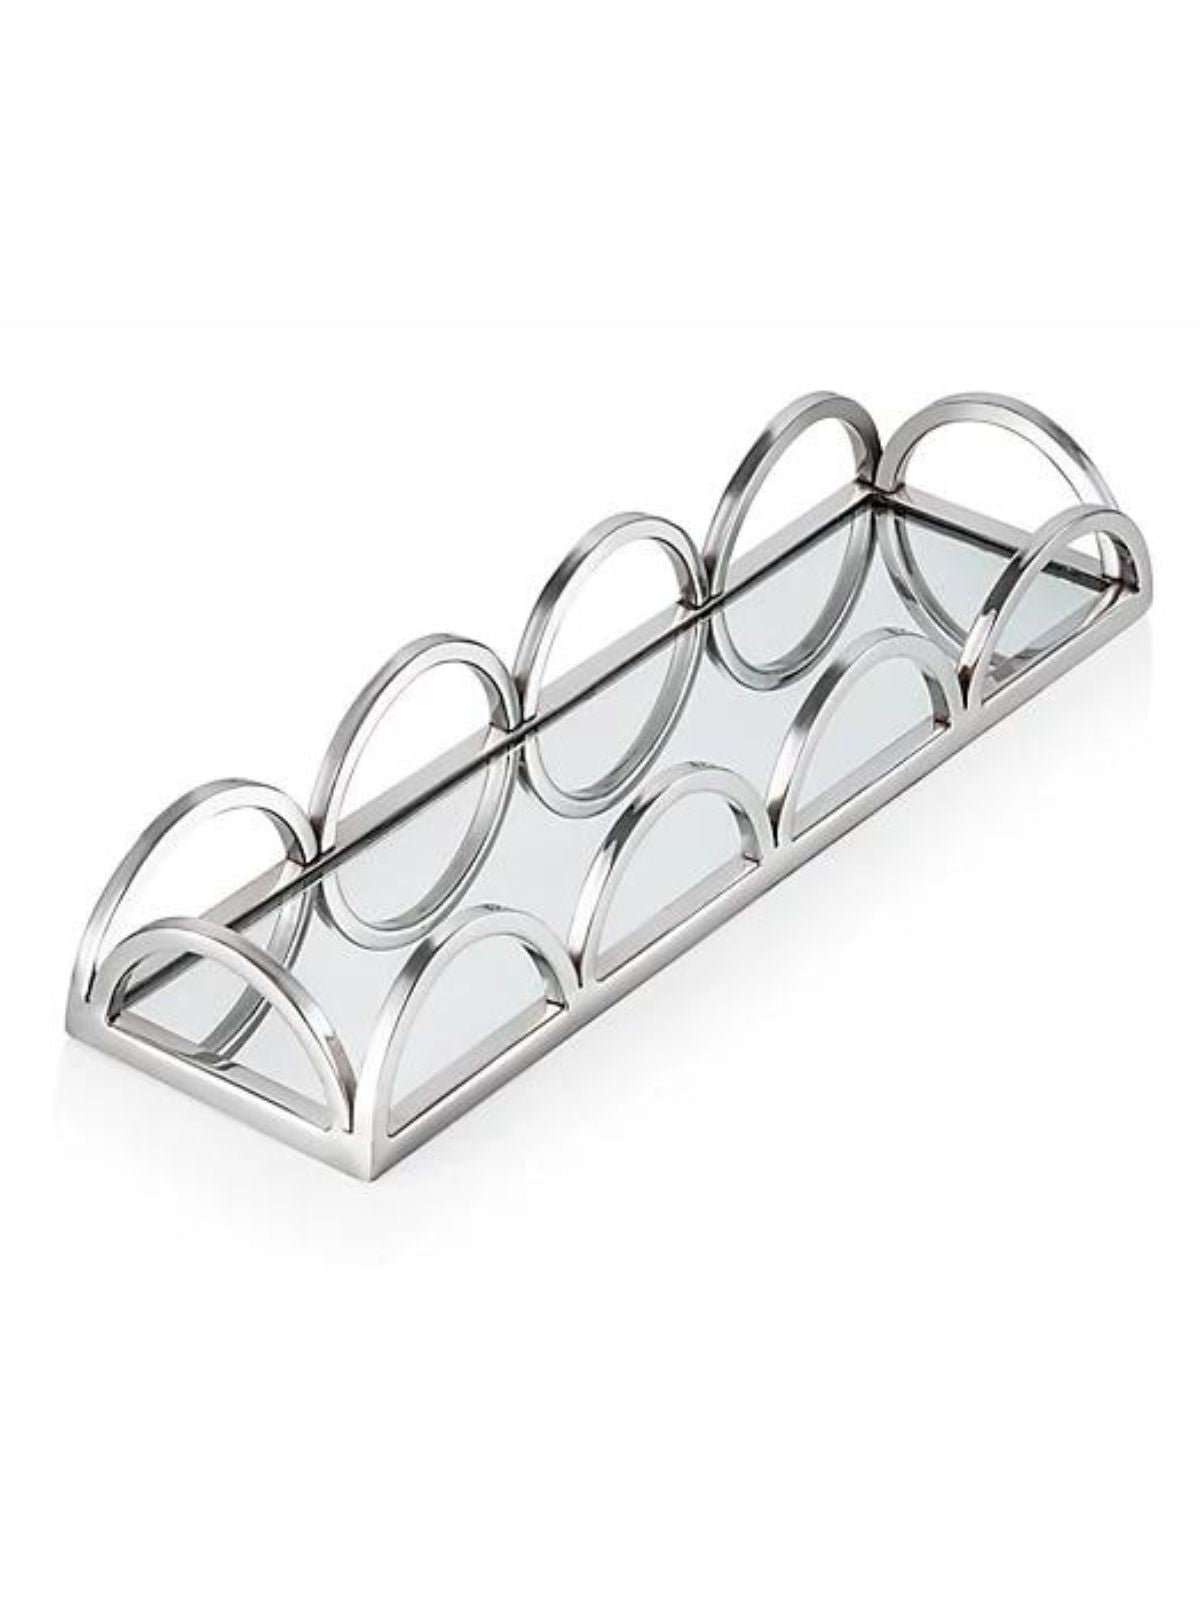 Rectangular Mirrored Decorative Vanity Tray with Chrome Loop Edges, 15in. 